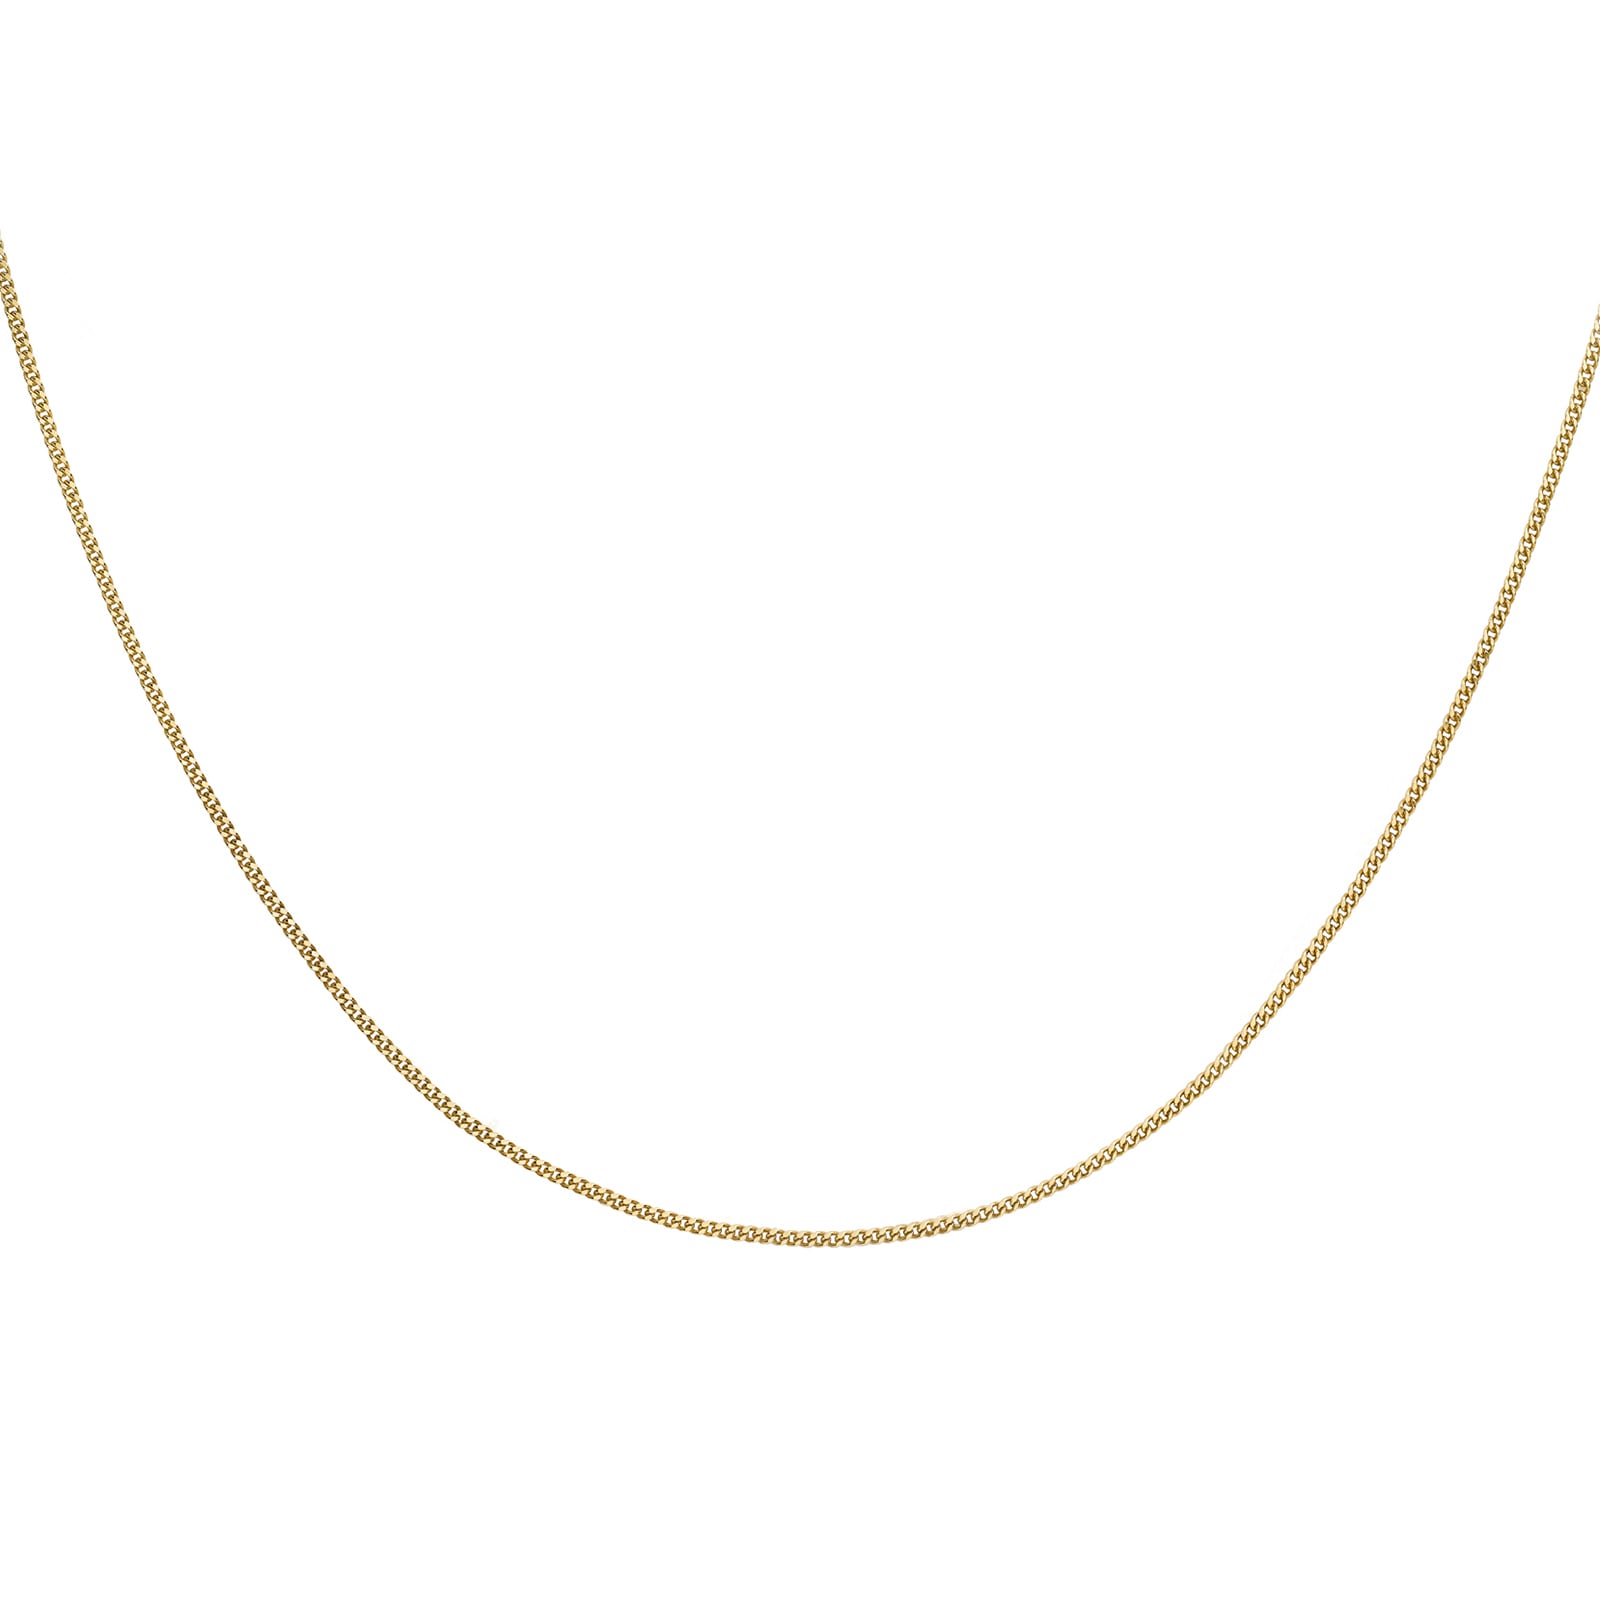 9ct Yellow Gold 60cm (24") Curb Chain 1mm Width